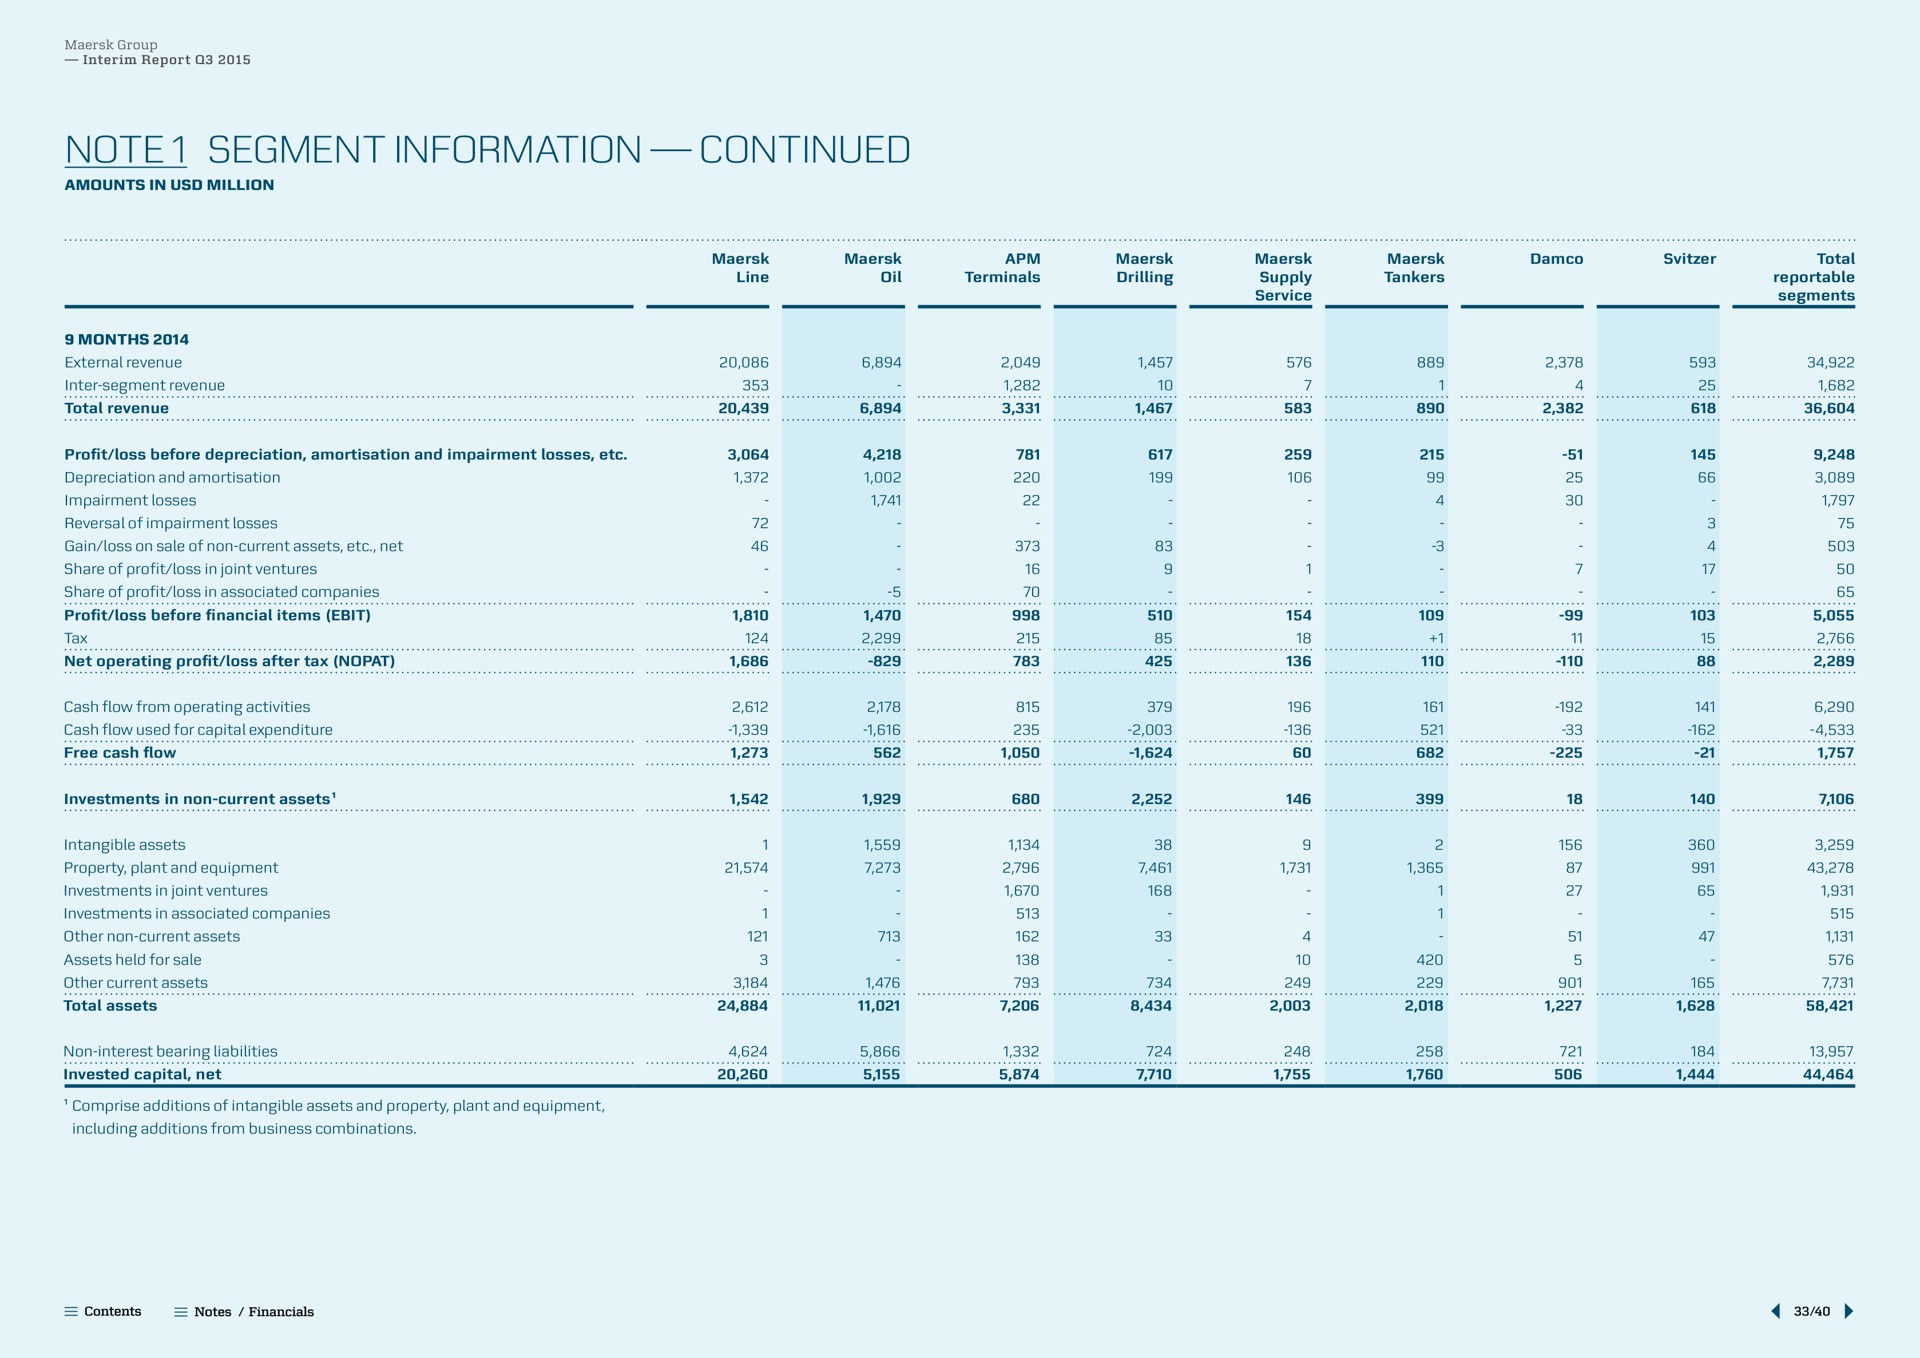 note segment information continued note an a investments in non current assets tana | Maersk